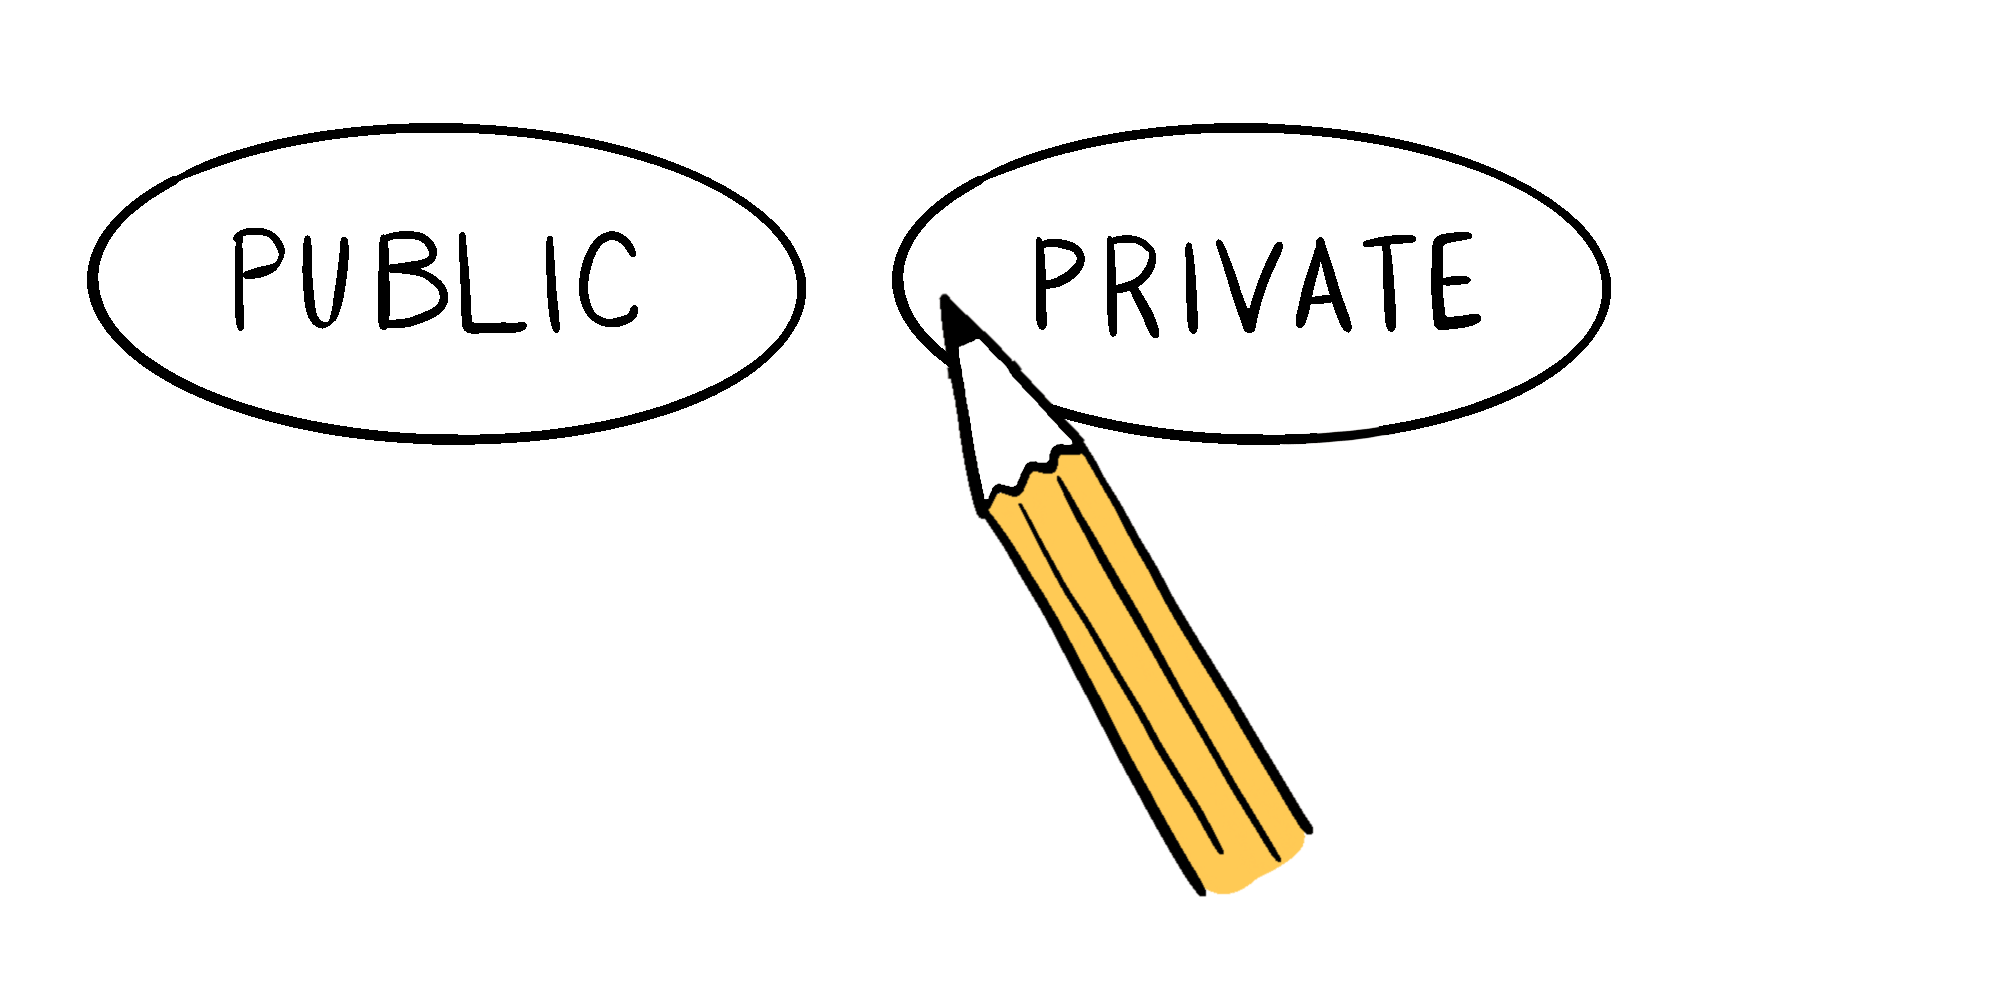 An animation of two standardized test bubbles, labeled "Public" and "Private" with a cartoon pencil coloring in the Private bubble.